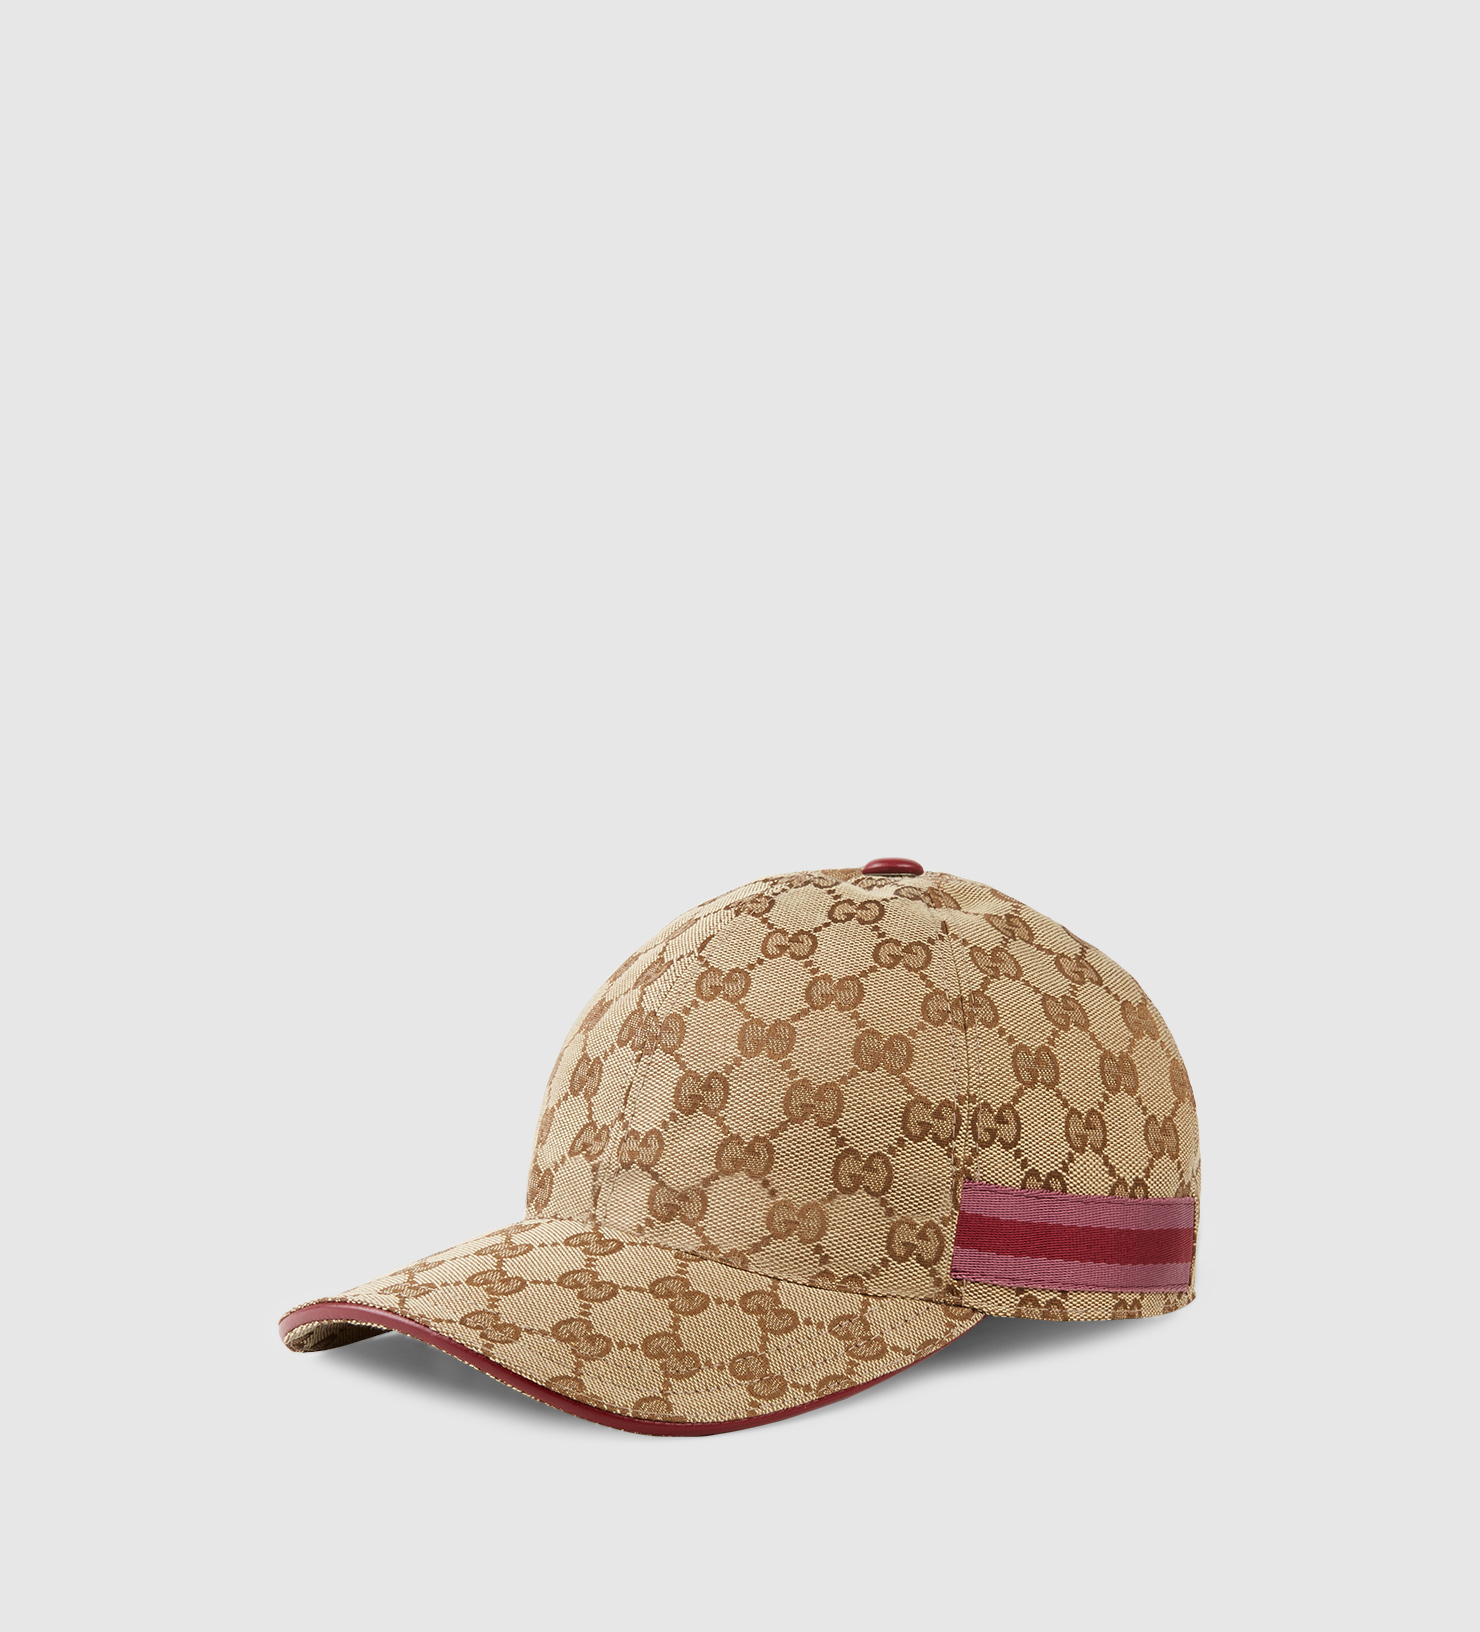 Gucci Original Gg Canvas Baseball Hat in Natural for Men - Lyst